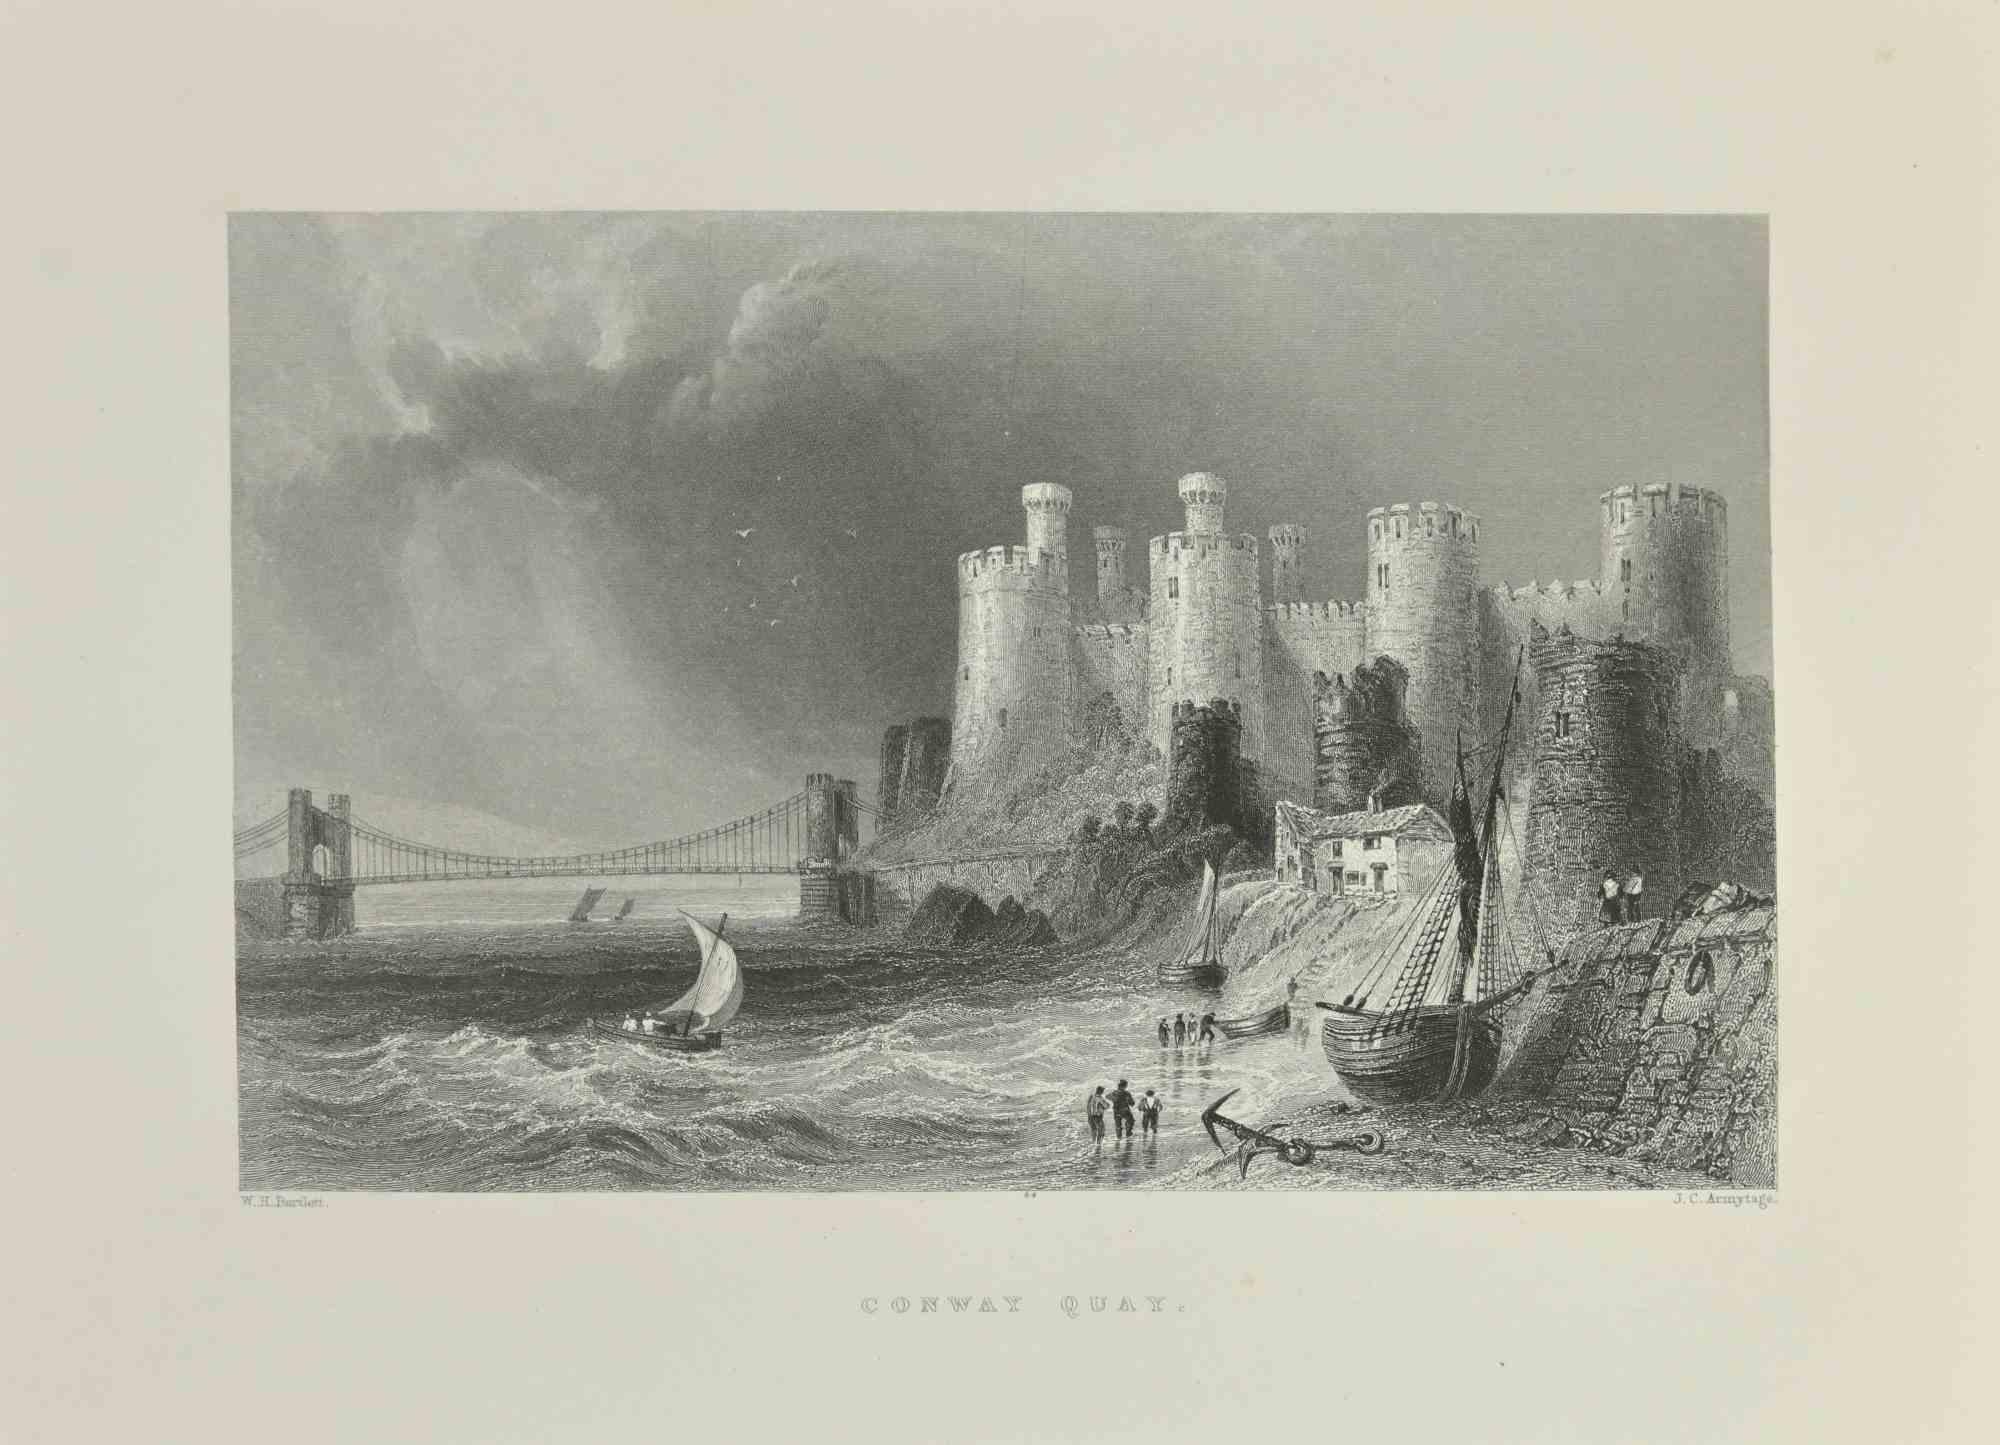 Conway Quay is an etching realized in 1845 by J.C. Armytage.

Signed in plate.

The artwork is realized in a well-balanced composition.